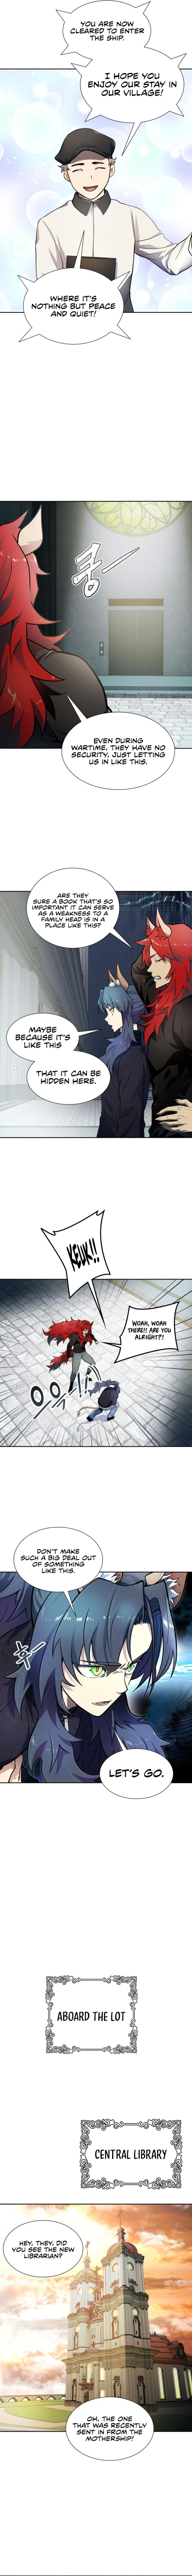 Tower Of God 581 18